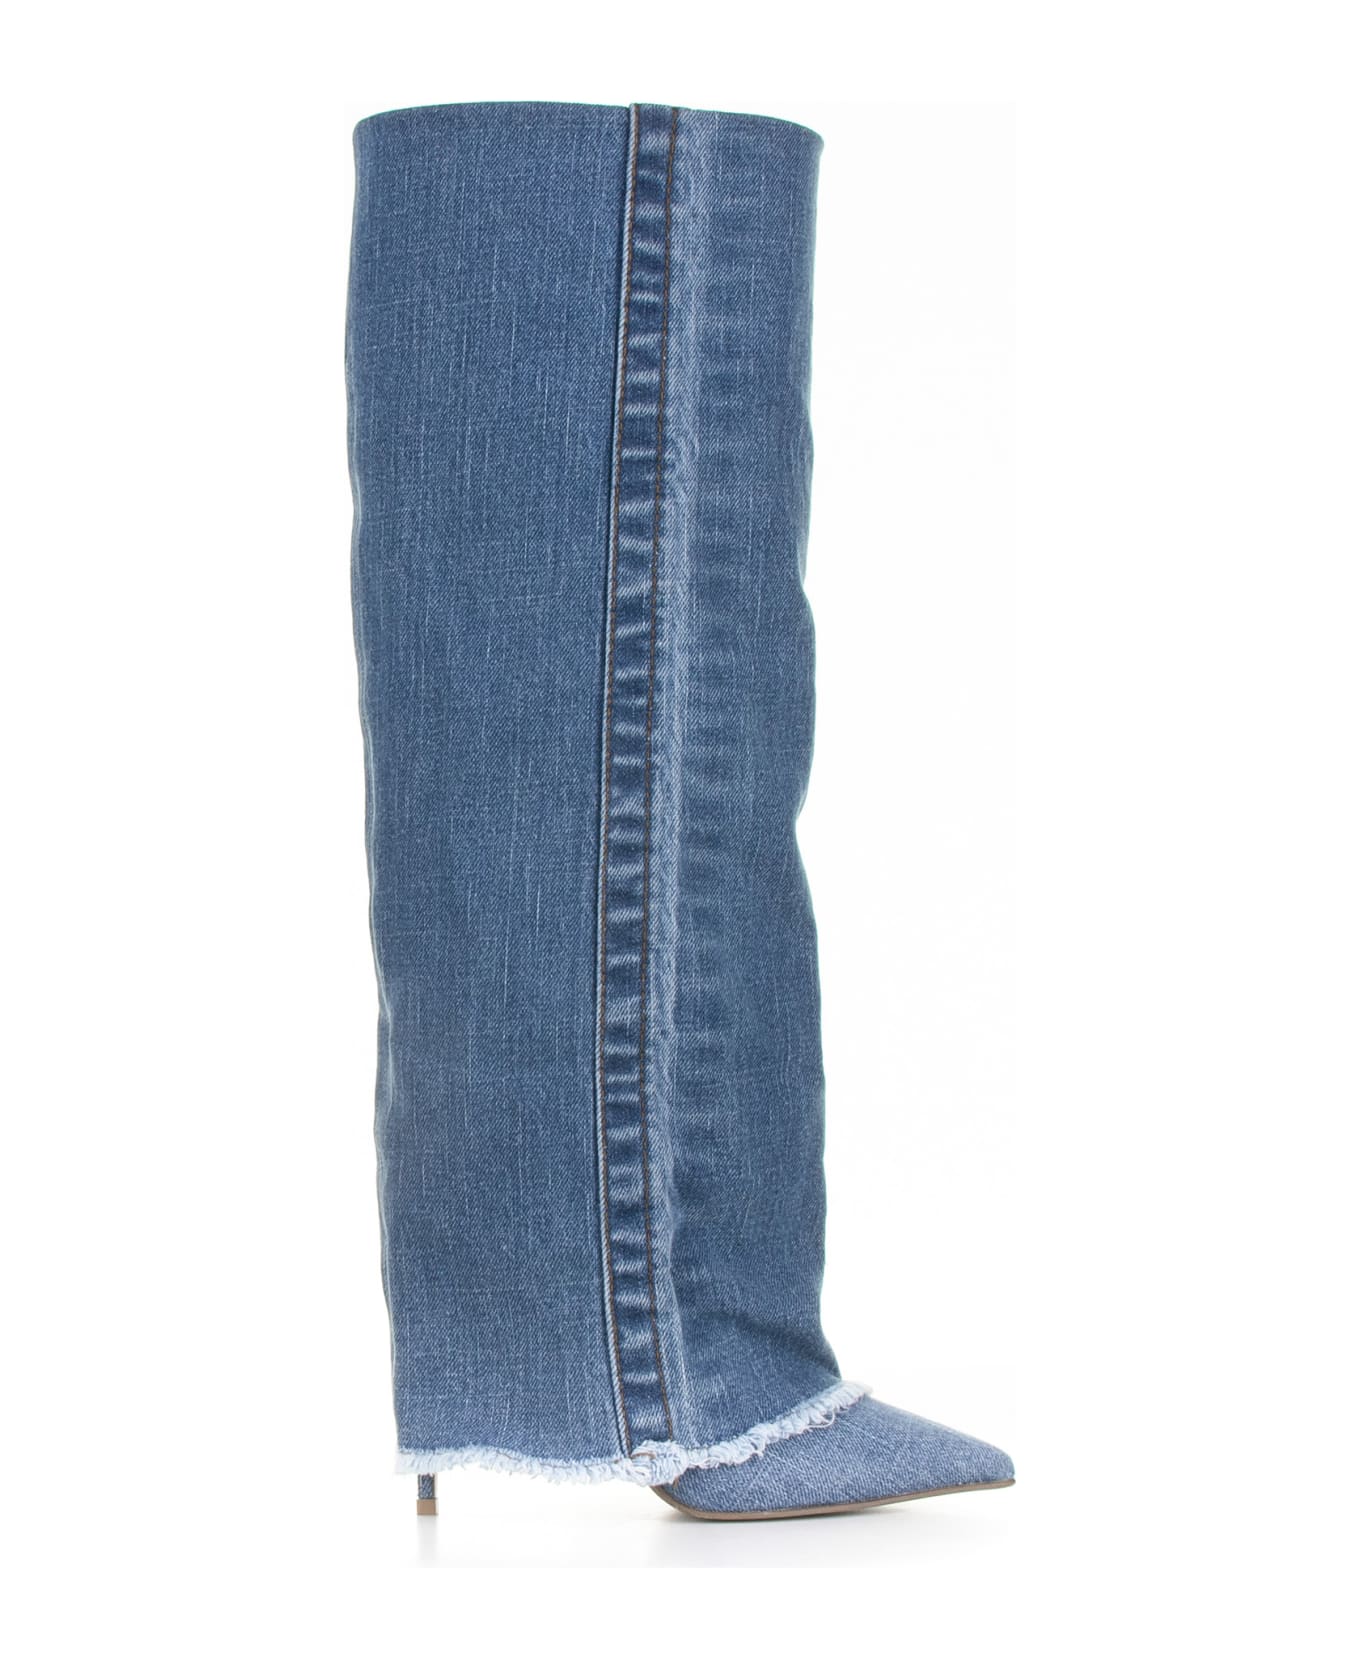 Le Silla Andy Boot With Cuff In Blue Denim - JEANS